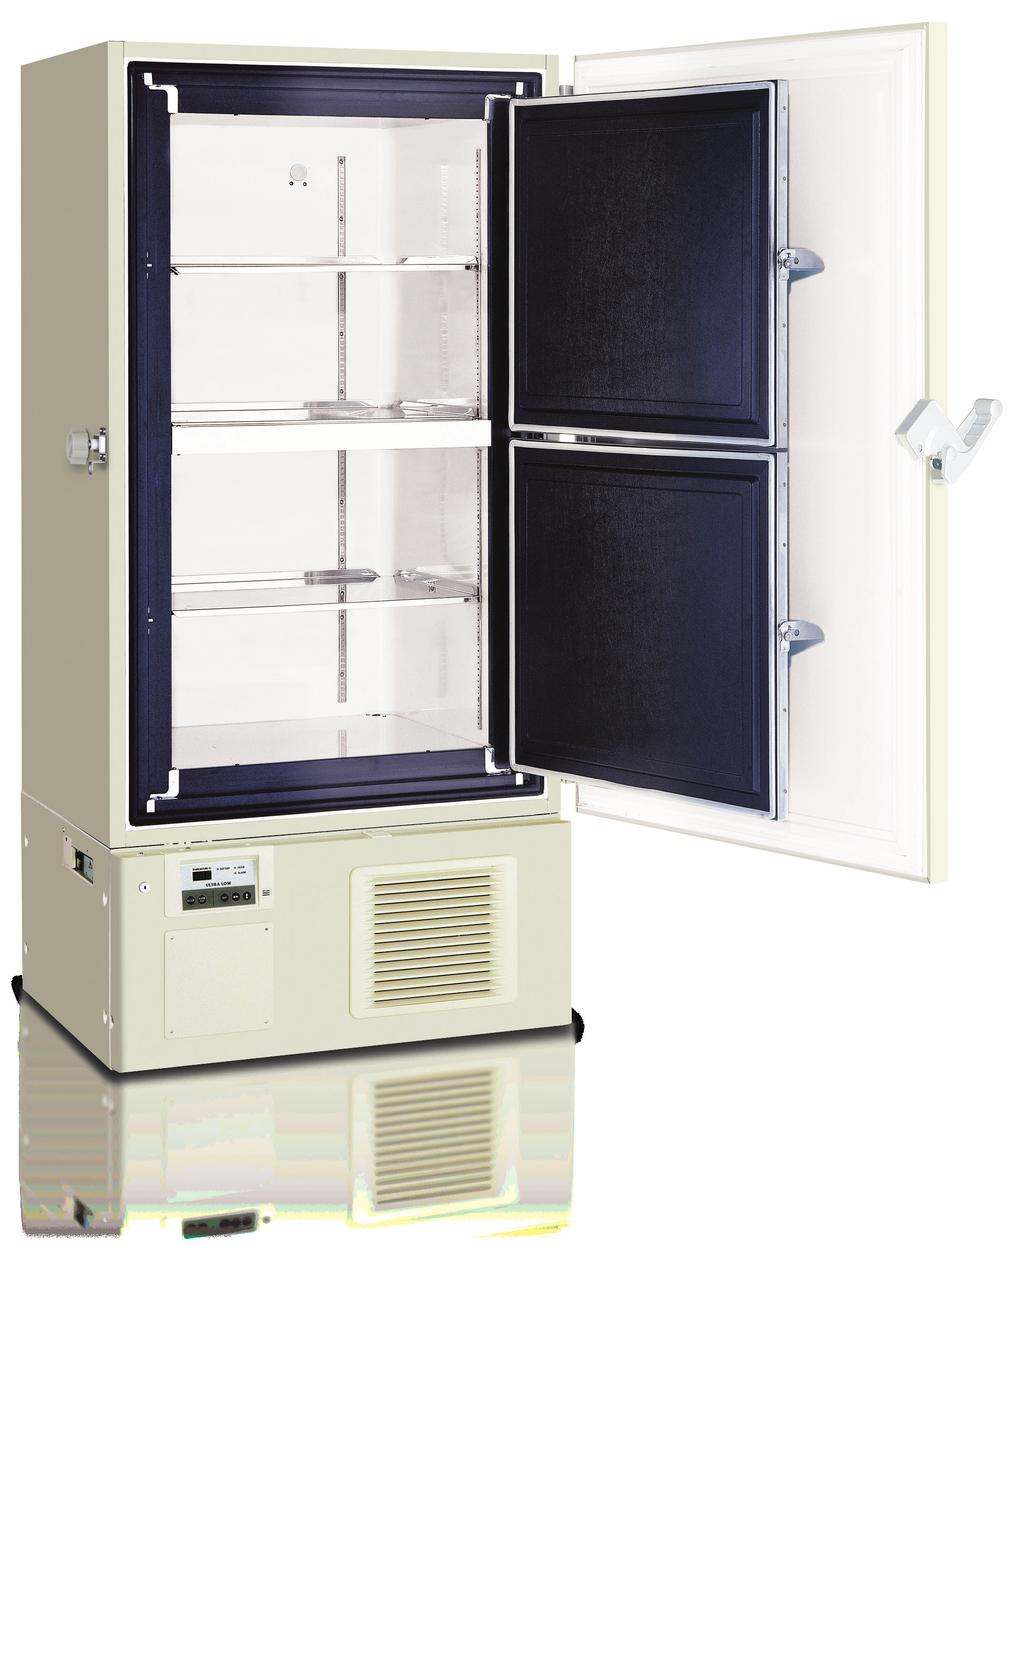 Our freezers maintain internal temperatures as low as -86 C, using compressors specially designed for ultra-low temperature applications.